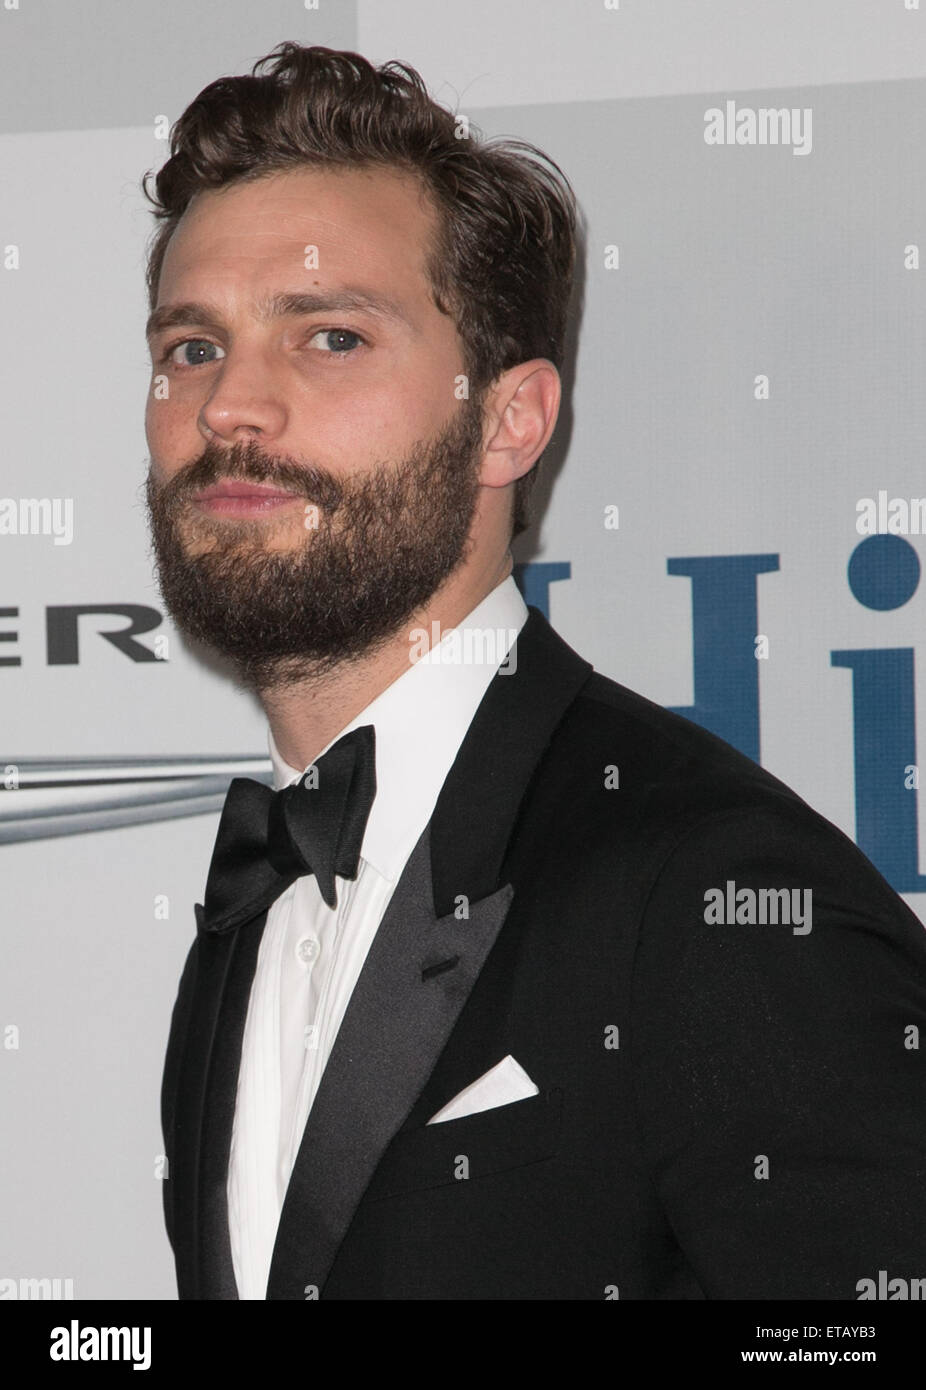 NBC/Universal's 72nd Annual Golden Globes After Party, sponsored in part by Chrysler, Hilton, and Qatar at The Beverly Hilton Hotel - Arrivals  Featuring: Jamie Dornan Where: Los Angeles, California, United States When: 12 Jan 2015 Credit: Brian To/WENN.com Stock Photo